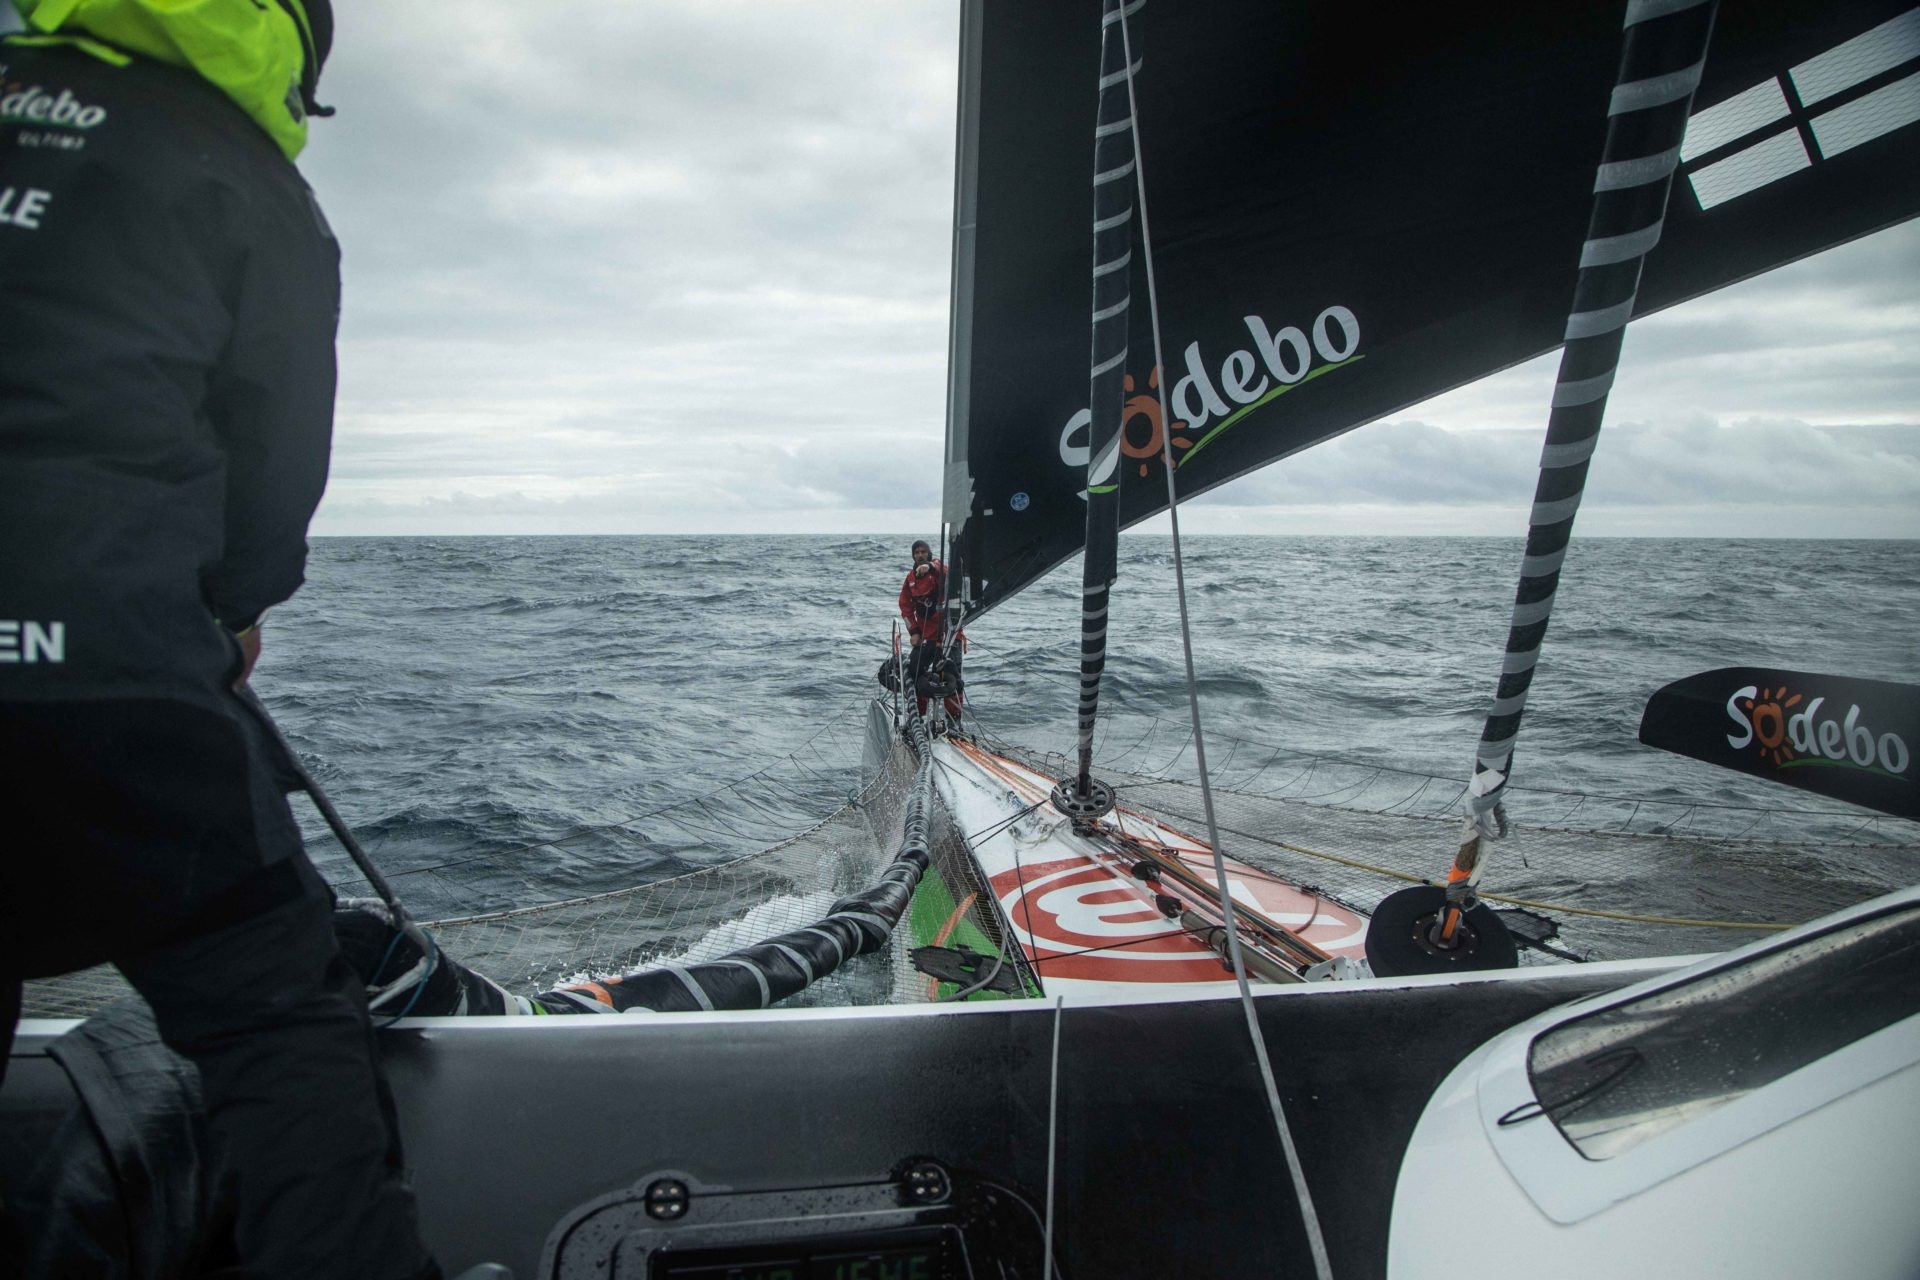  Trophee Jules Verne  Day 16  advantage on record shrinking